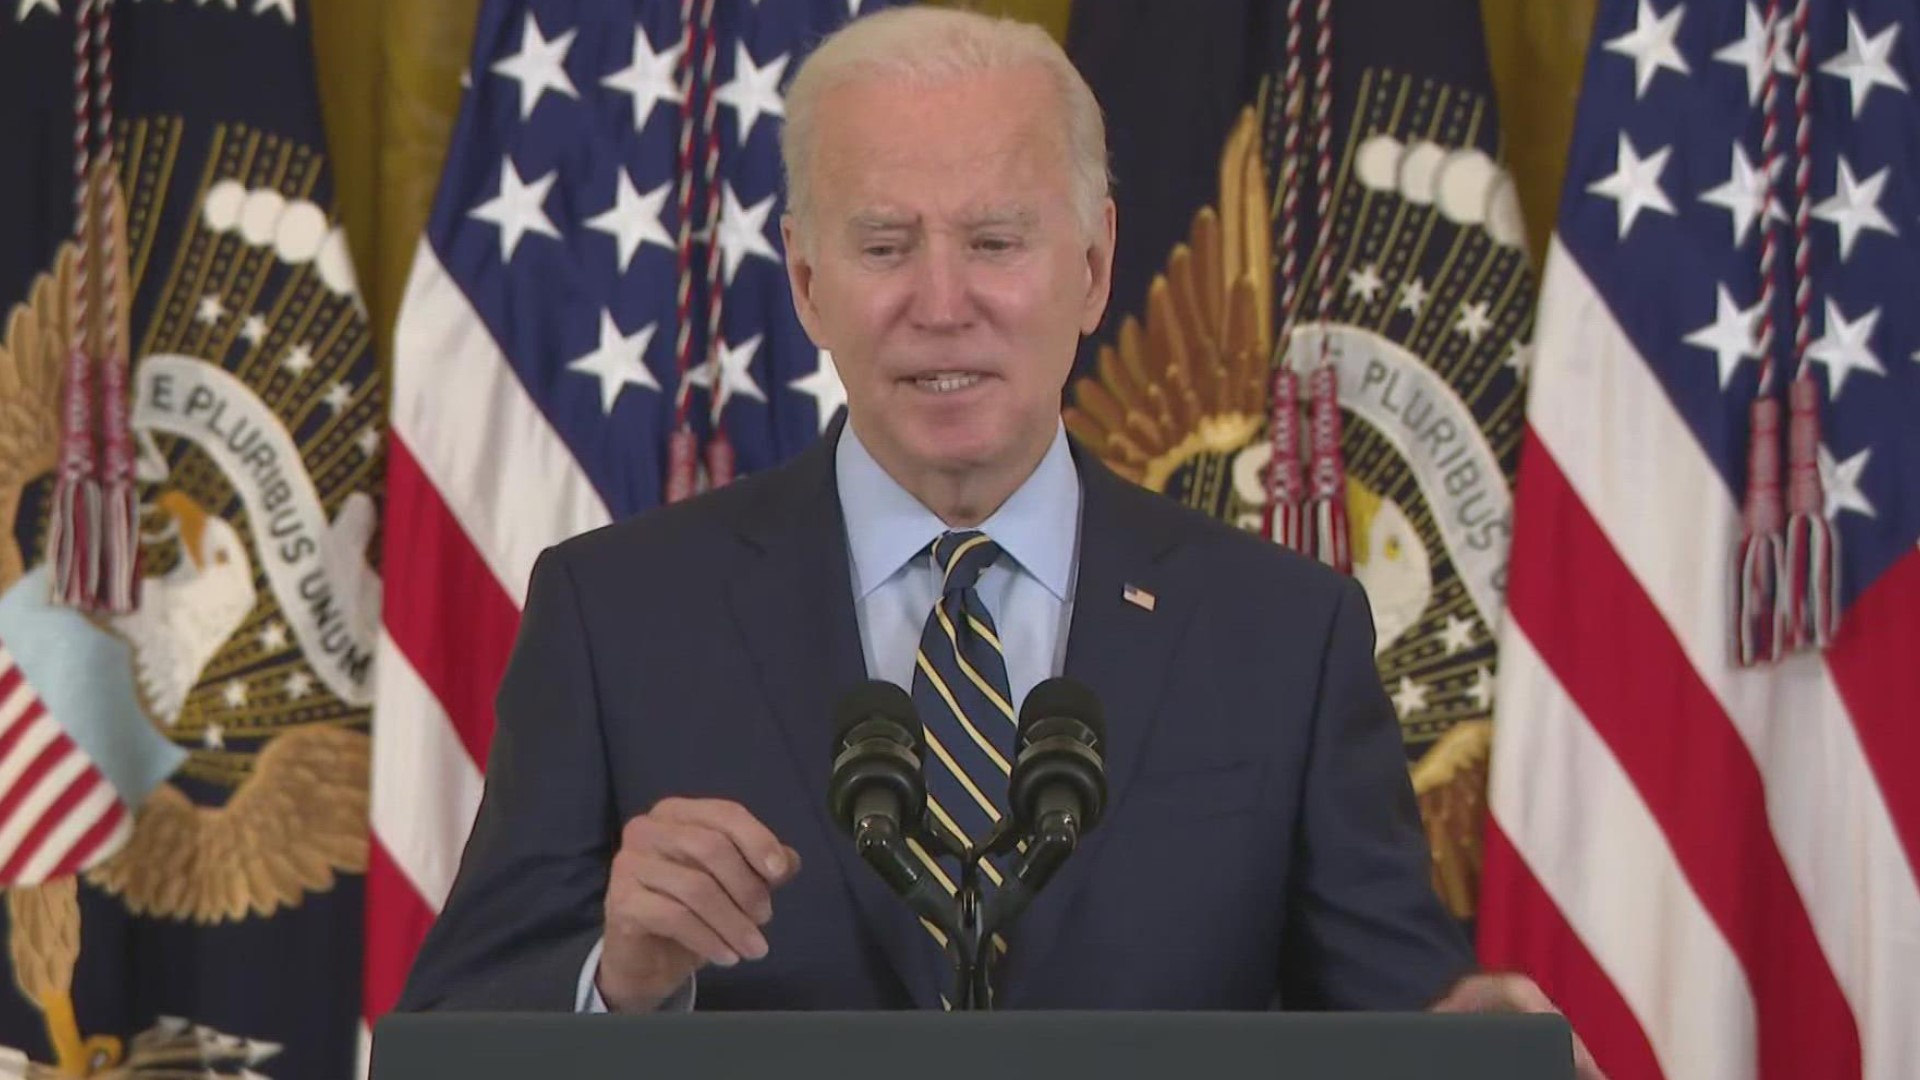 President Biden said he's going to do everything he can to lower the cost of prescription drugs.